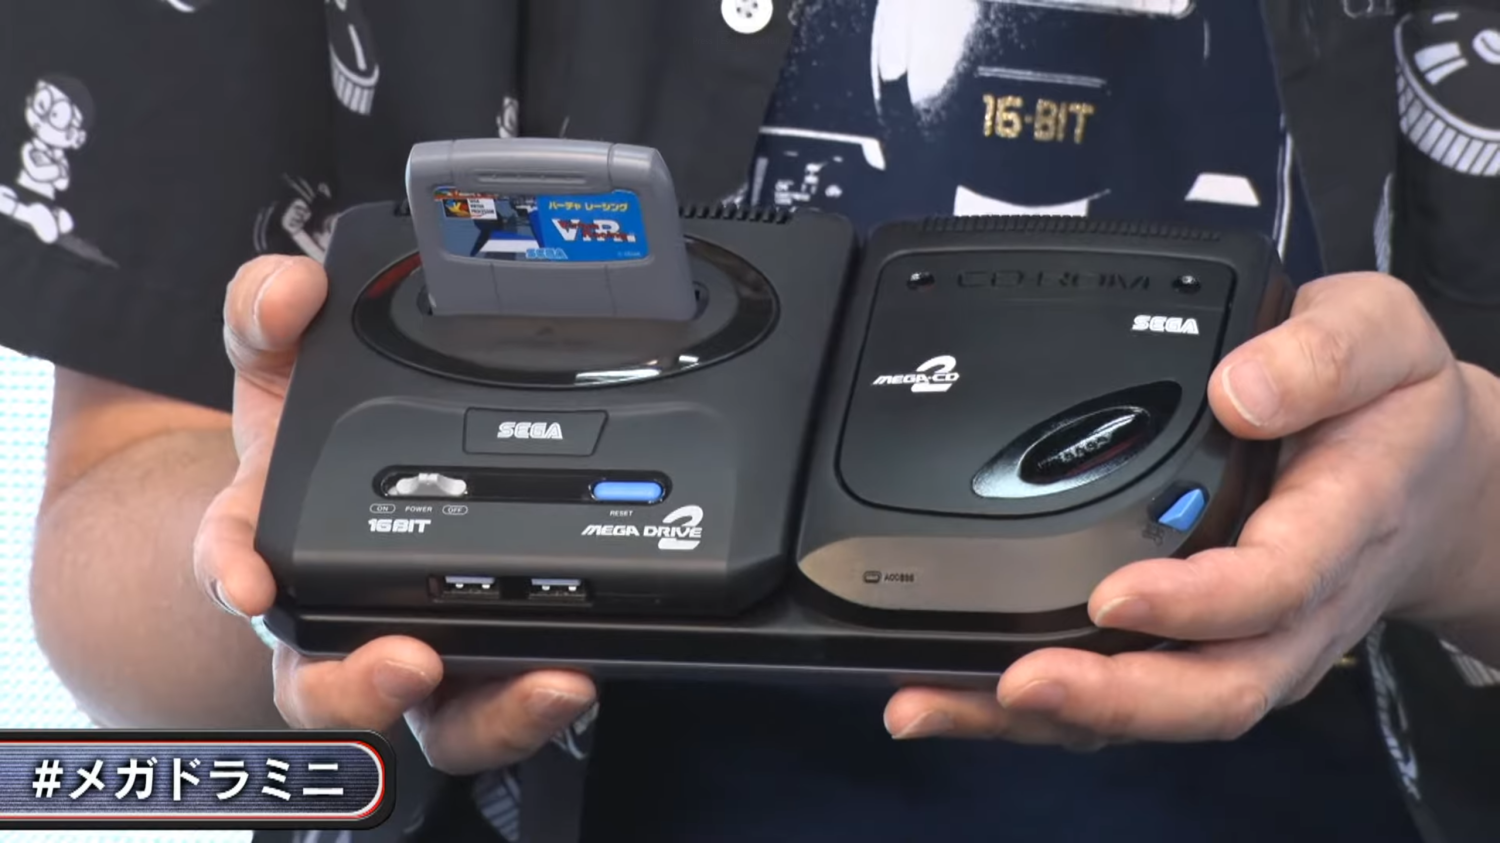 New Mega Drive mini is one of the coolest things SEGA has ever made